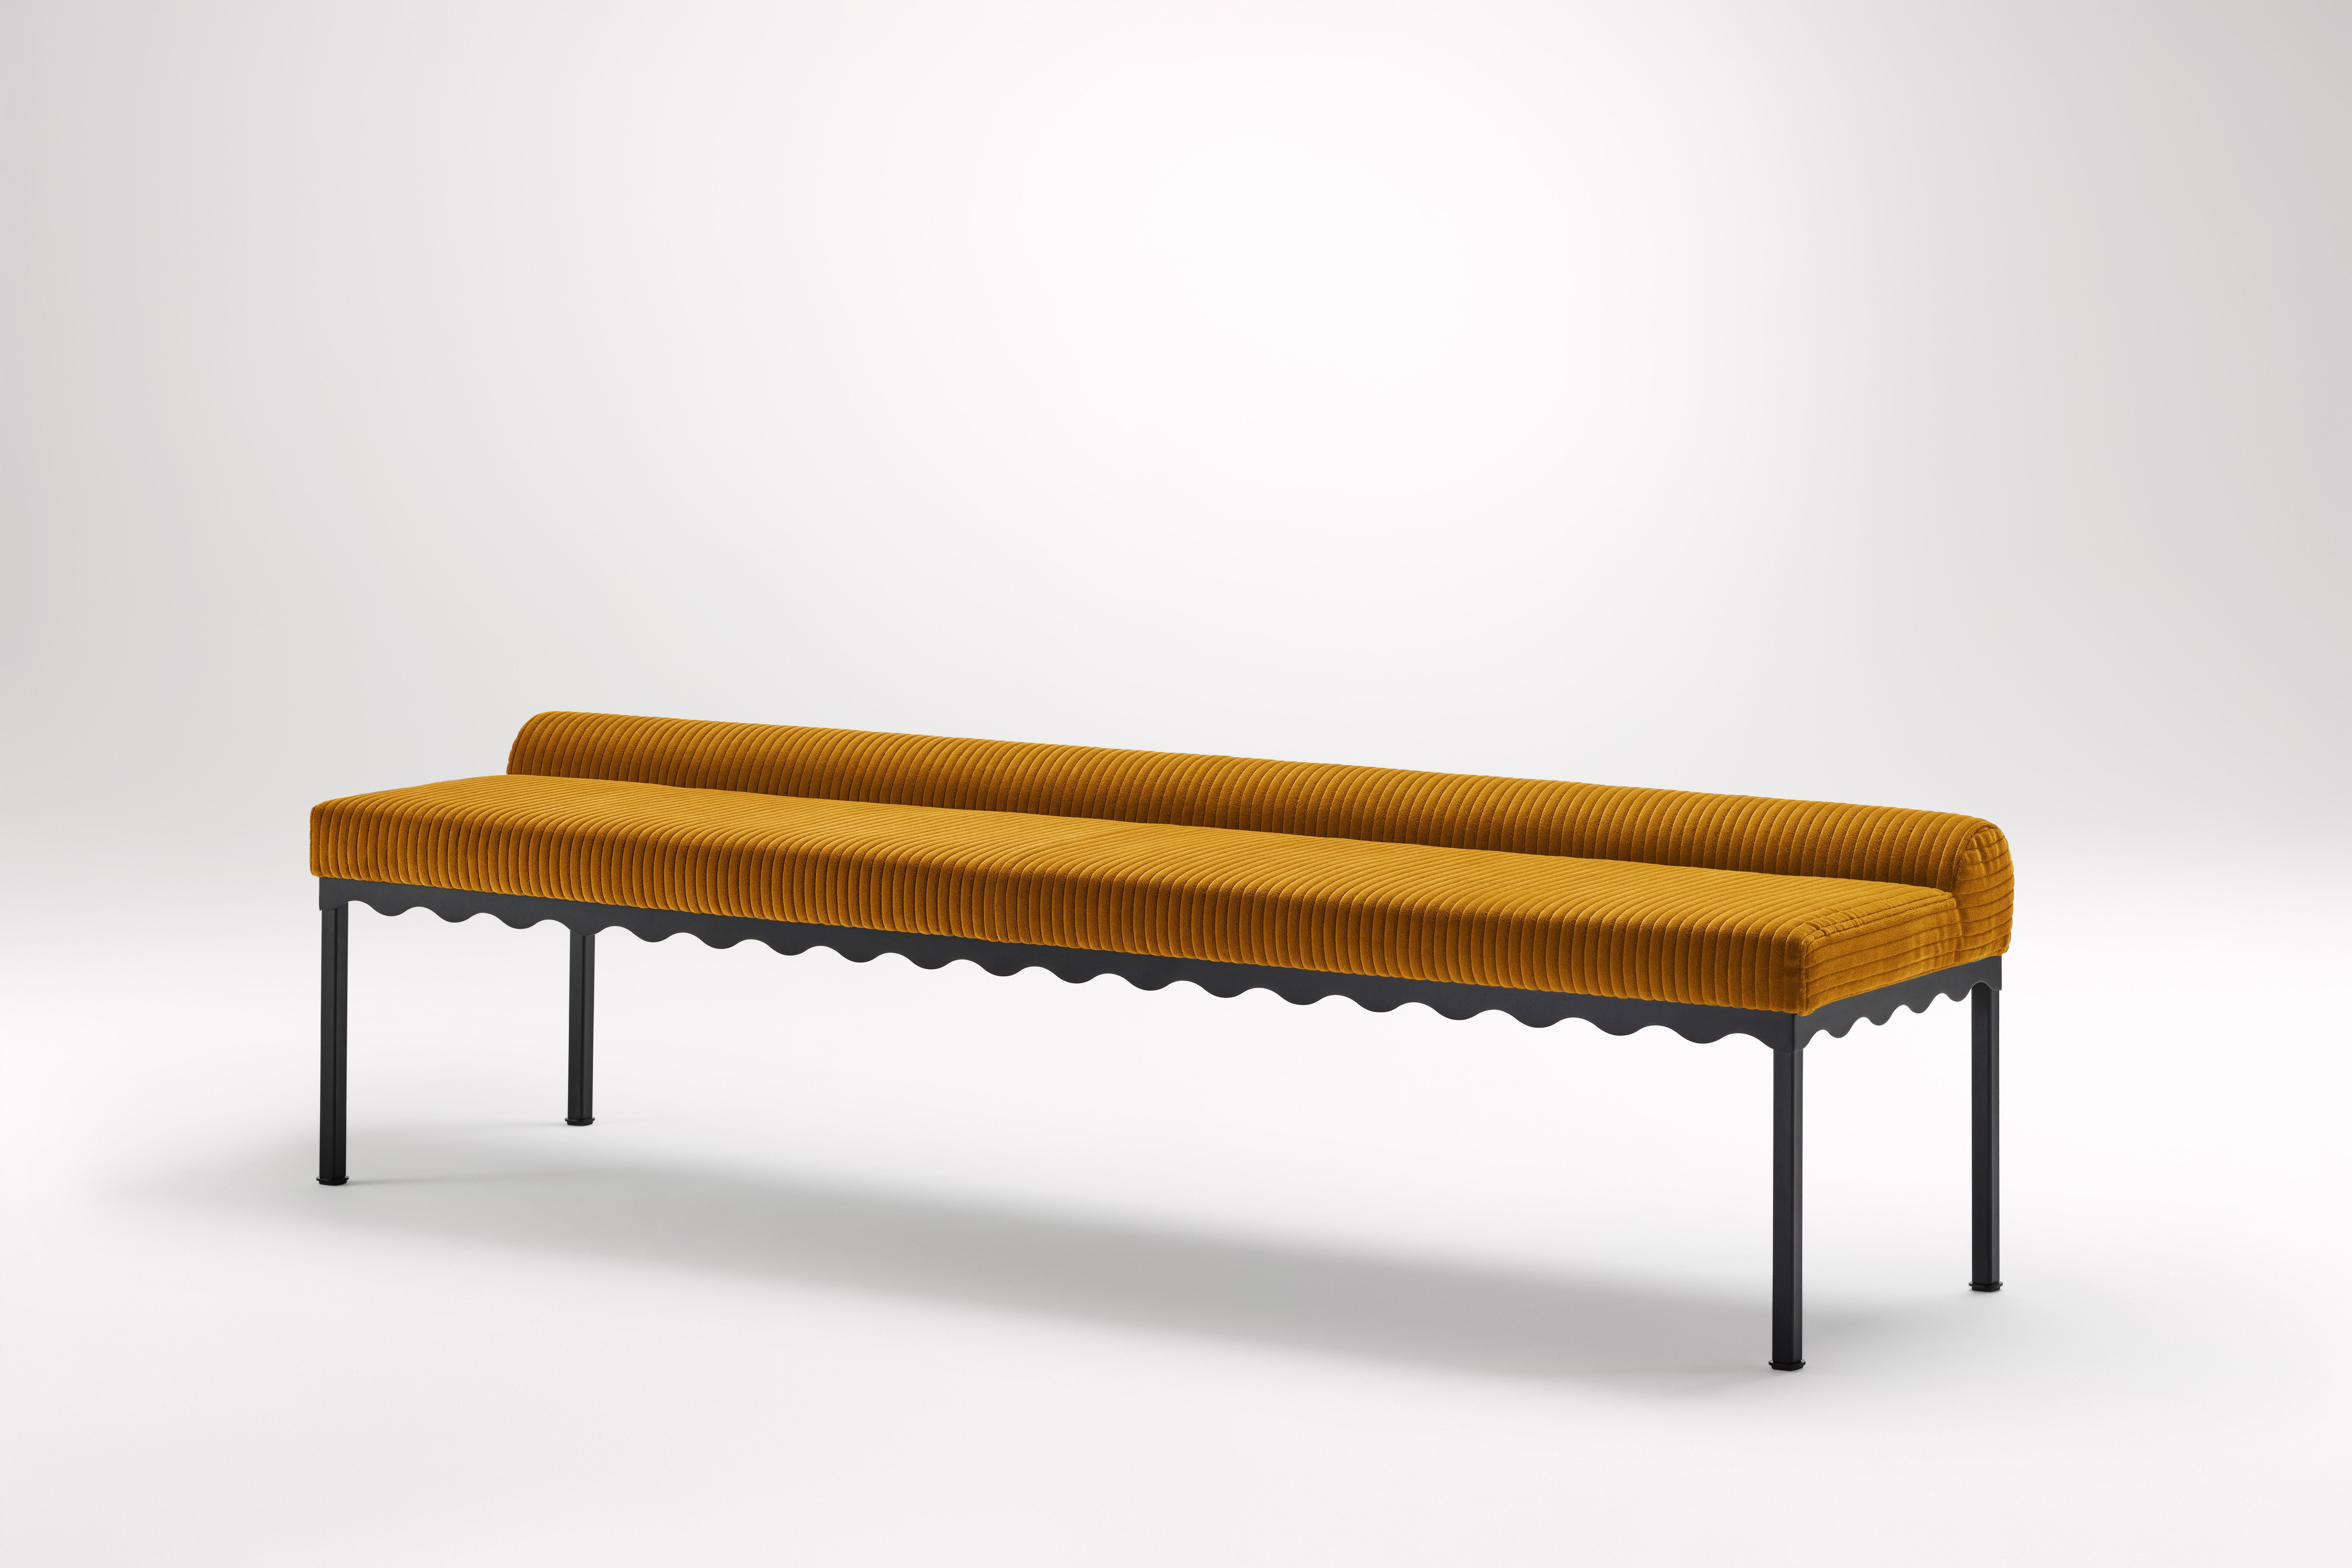 Steel Sanguine Bellini 2040 Bench by Coco Flip For Sale